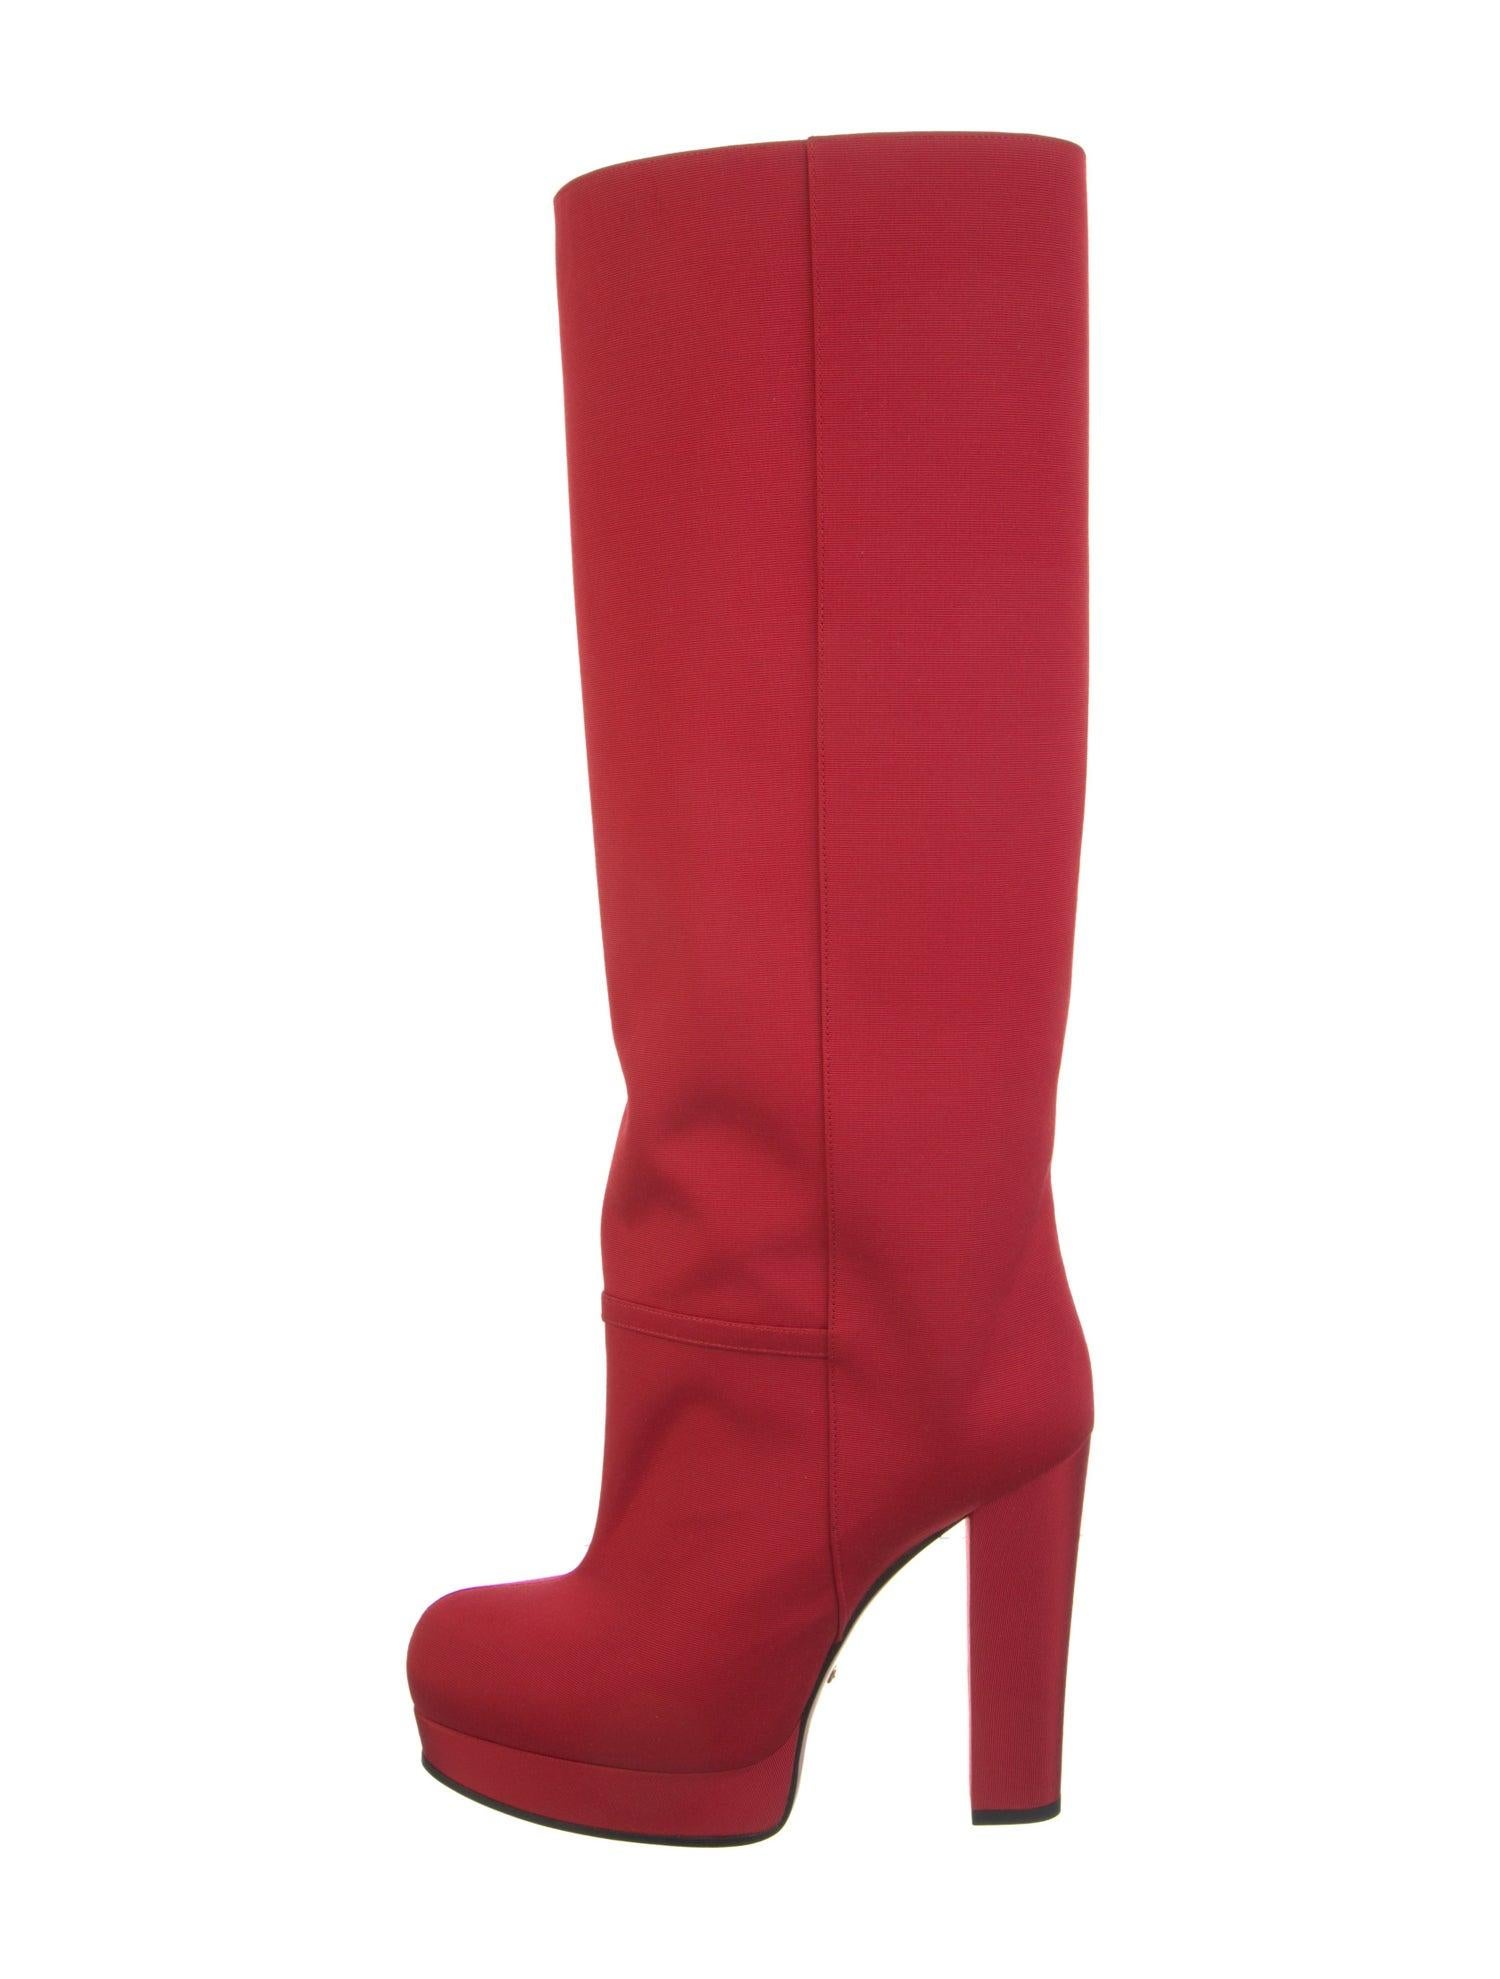 New With Box Gucci Fall 2019 Alessandro Michele Red Boots Sz 36.5 For Sale 5